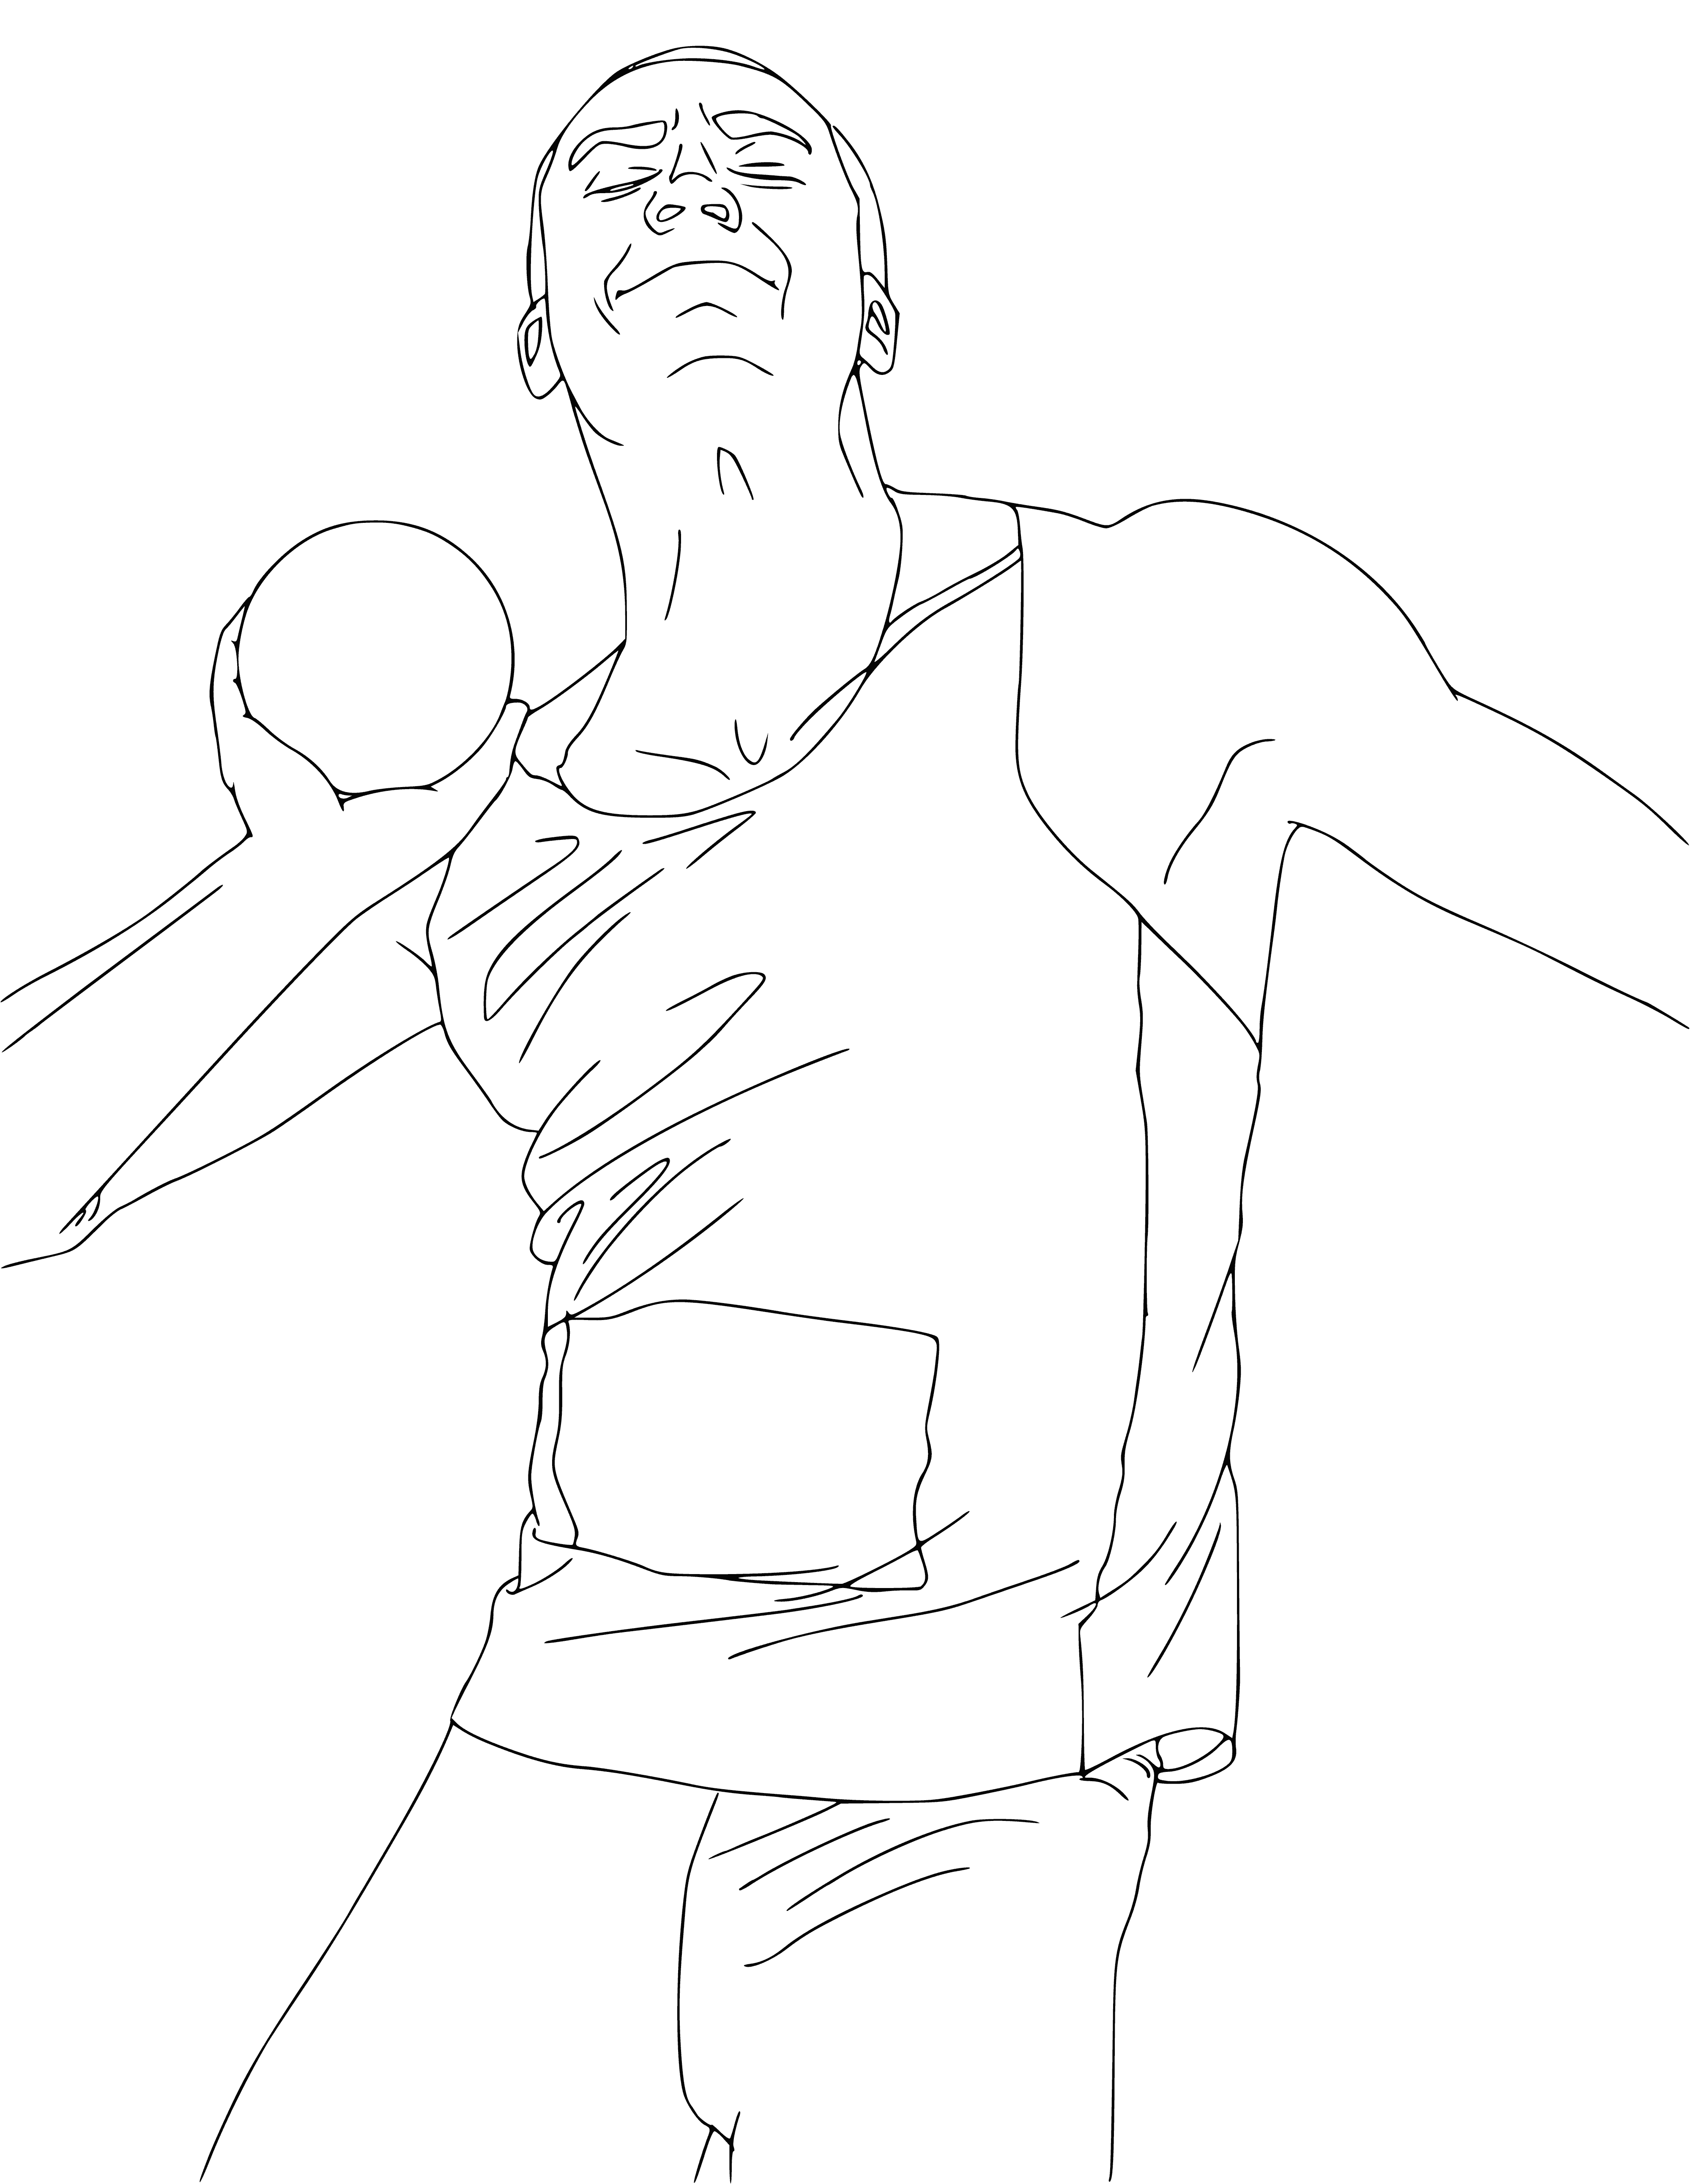 coloring page: Person stands w/ feet shoulder-width, legs bent, ball in r. hand, left arm out, looking to r. Throwing core.